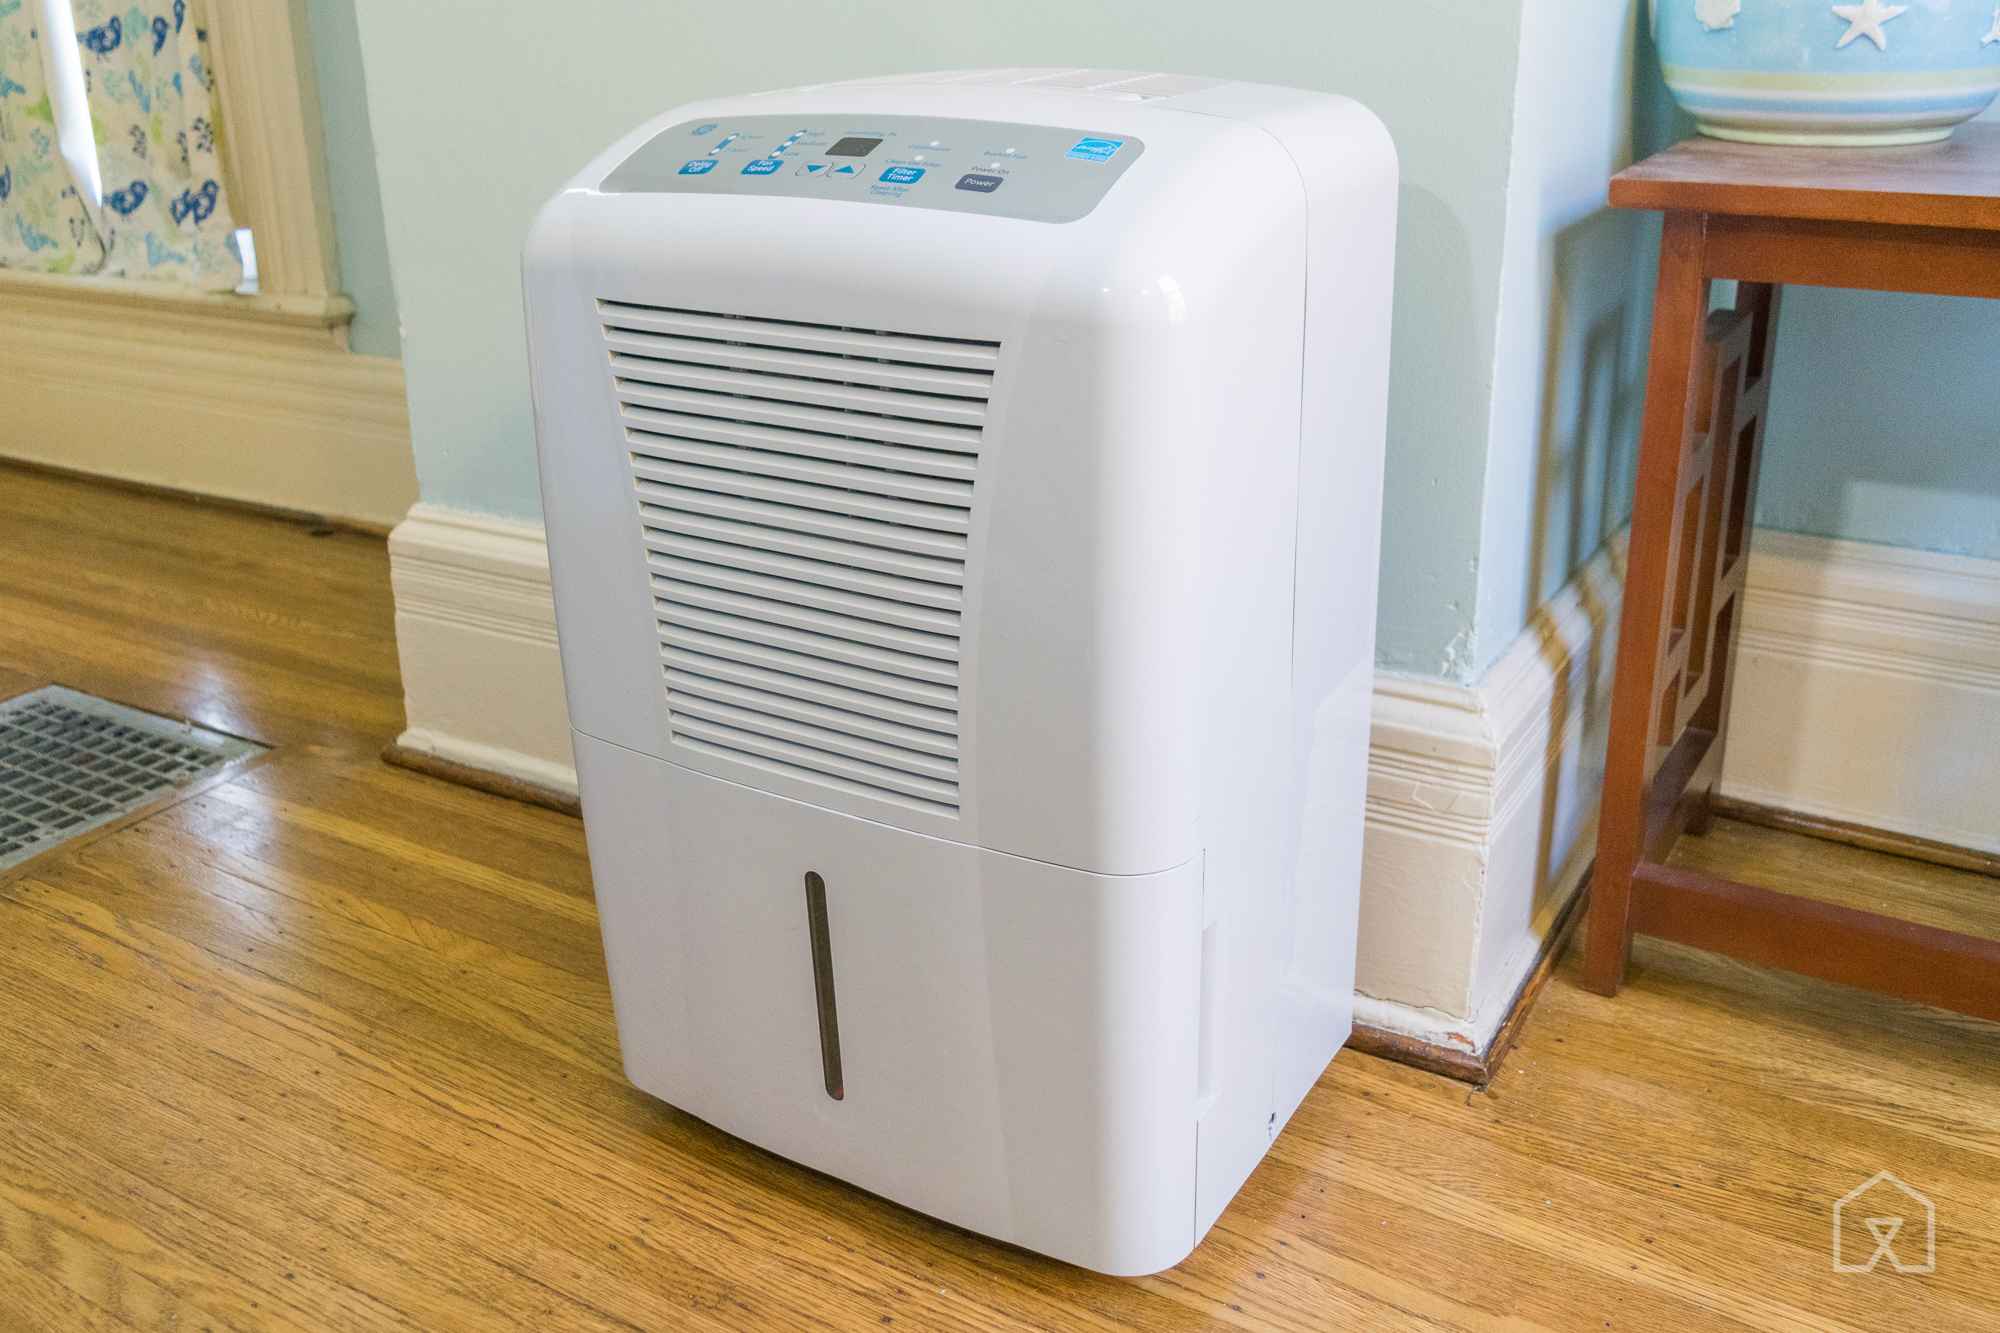 Ge Dehumidifier 50 Pint Adel50Lr / New And Used Dehumidifier For Sale